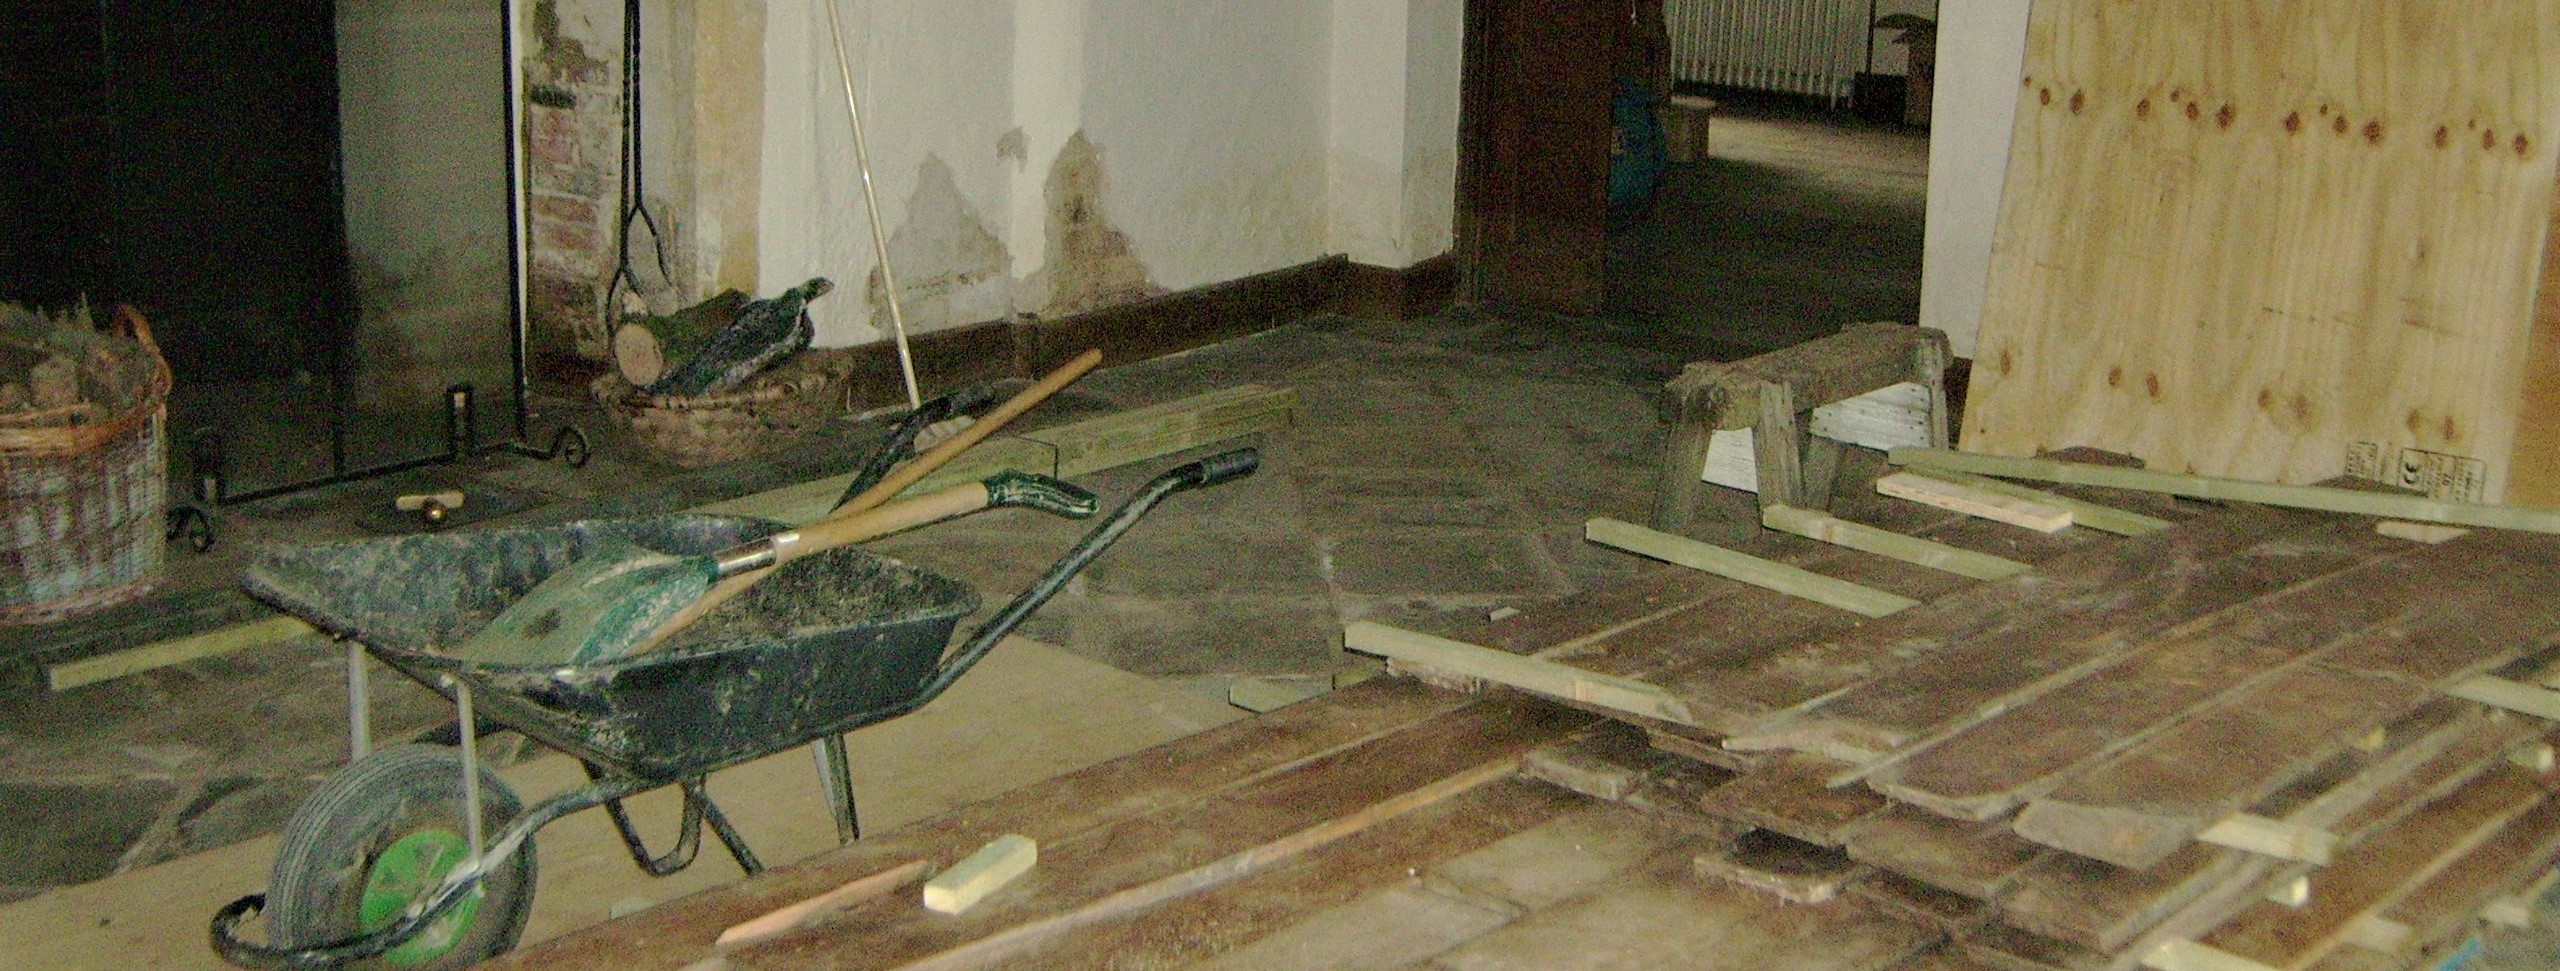 Repairs underway to a listed building following flood damage